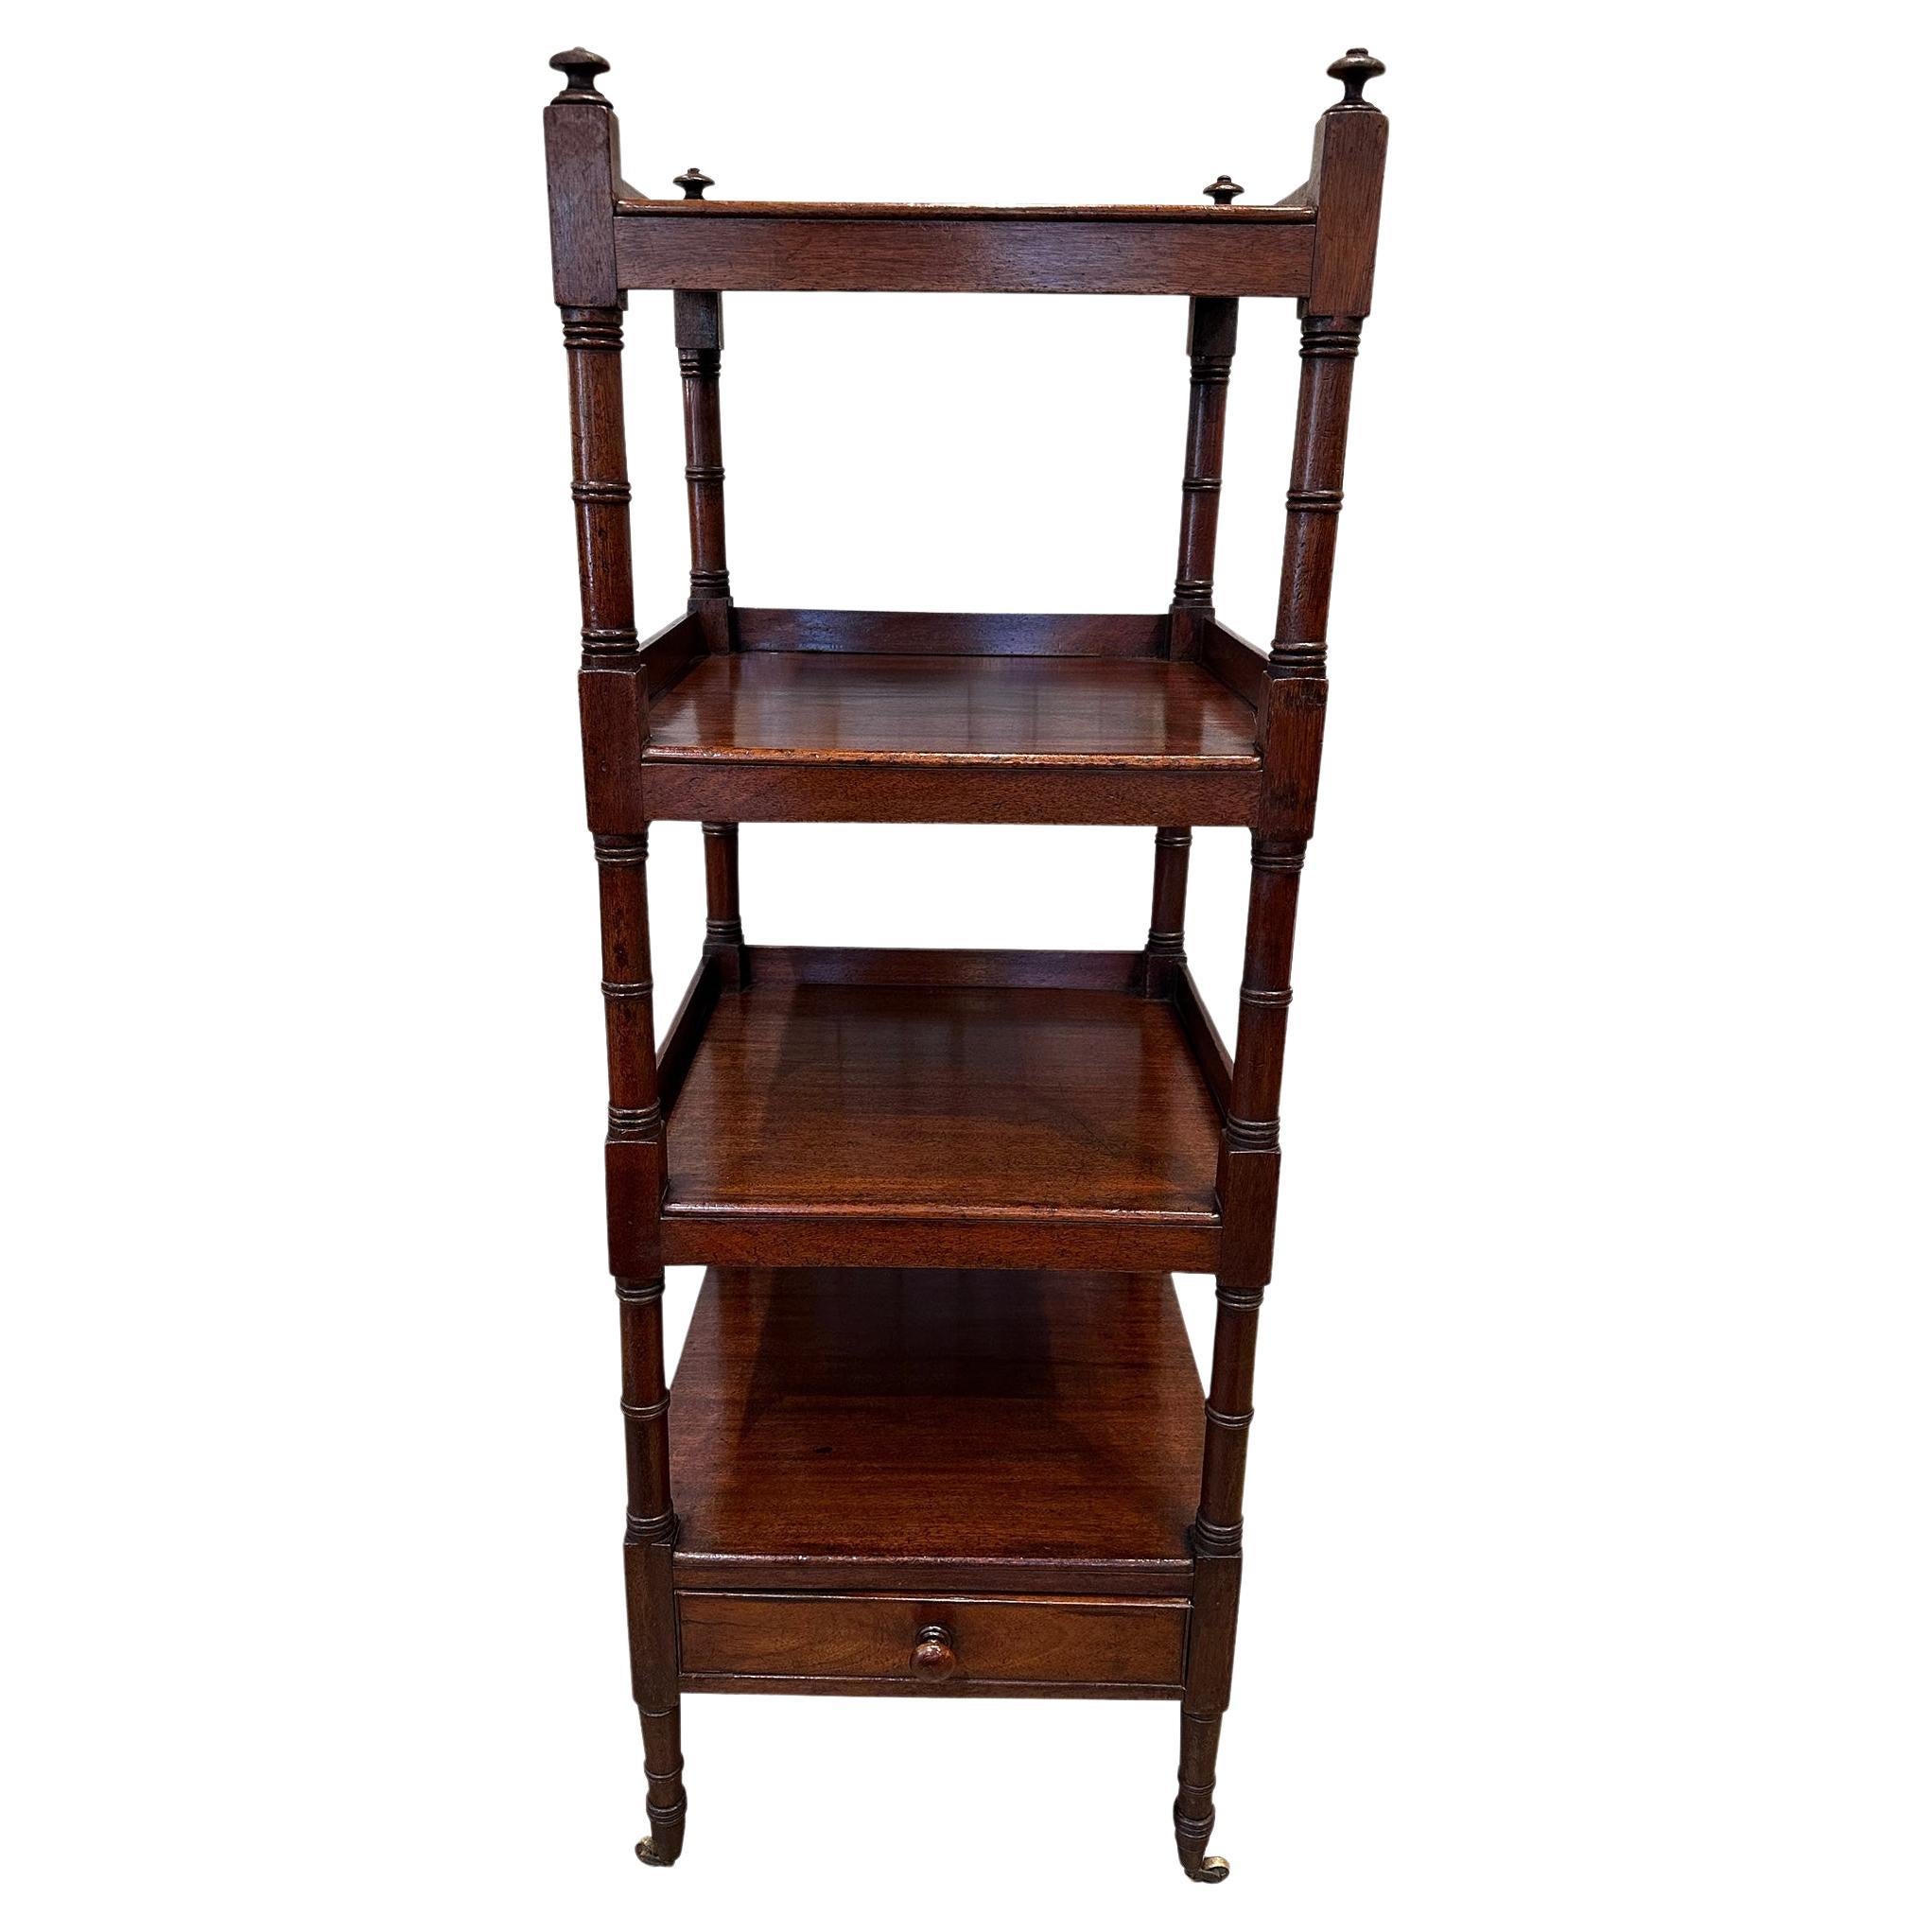 19th Century English Etagere For Sale